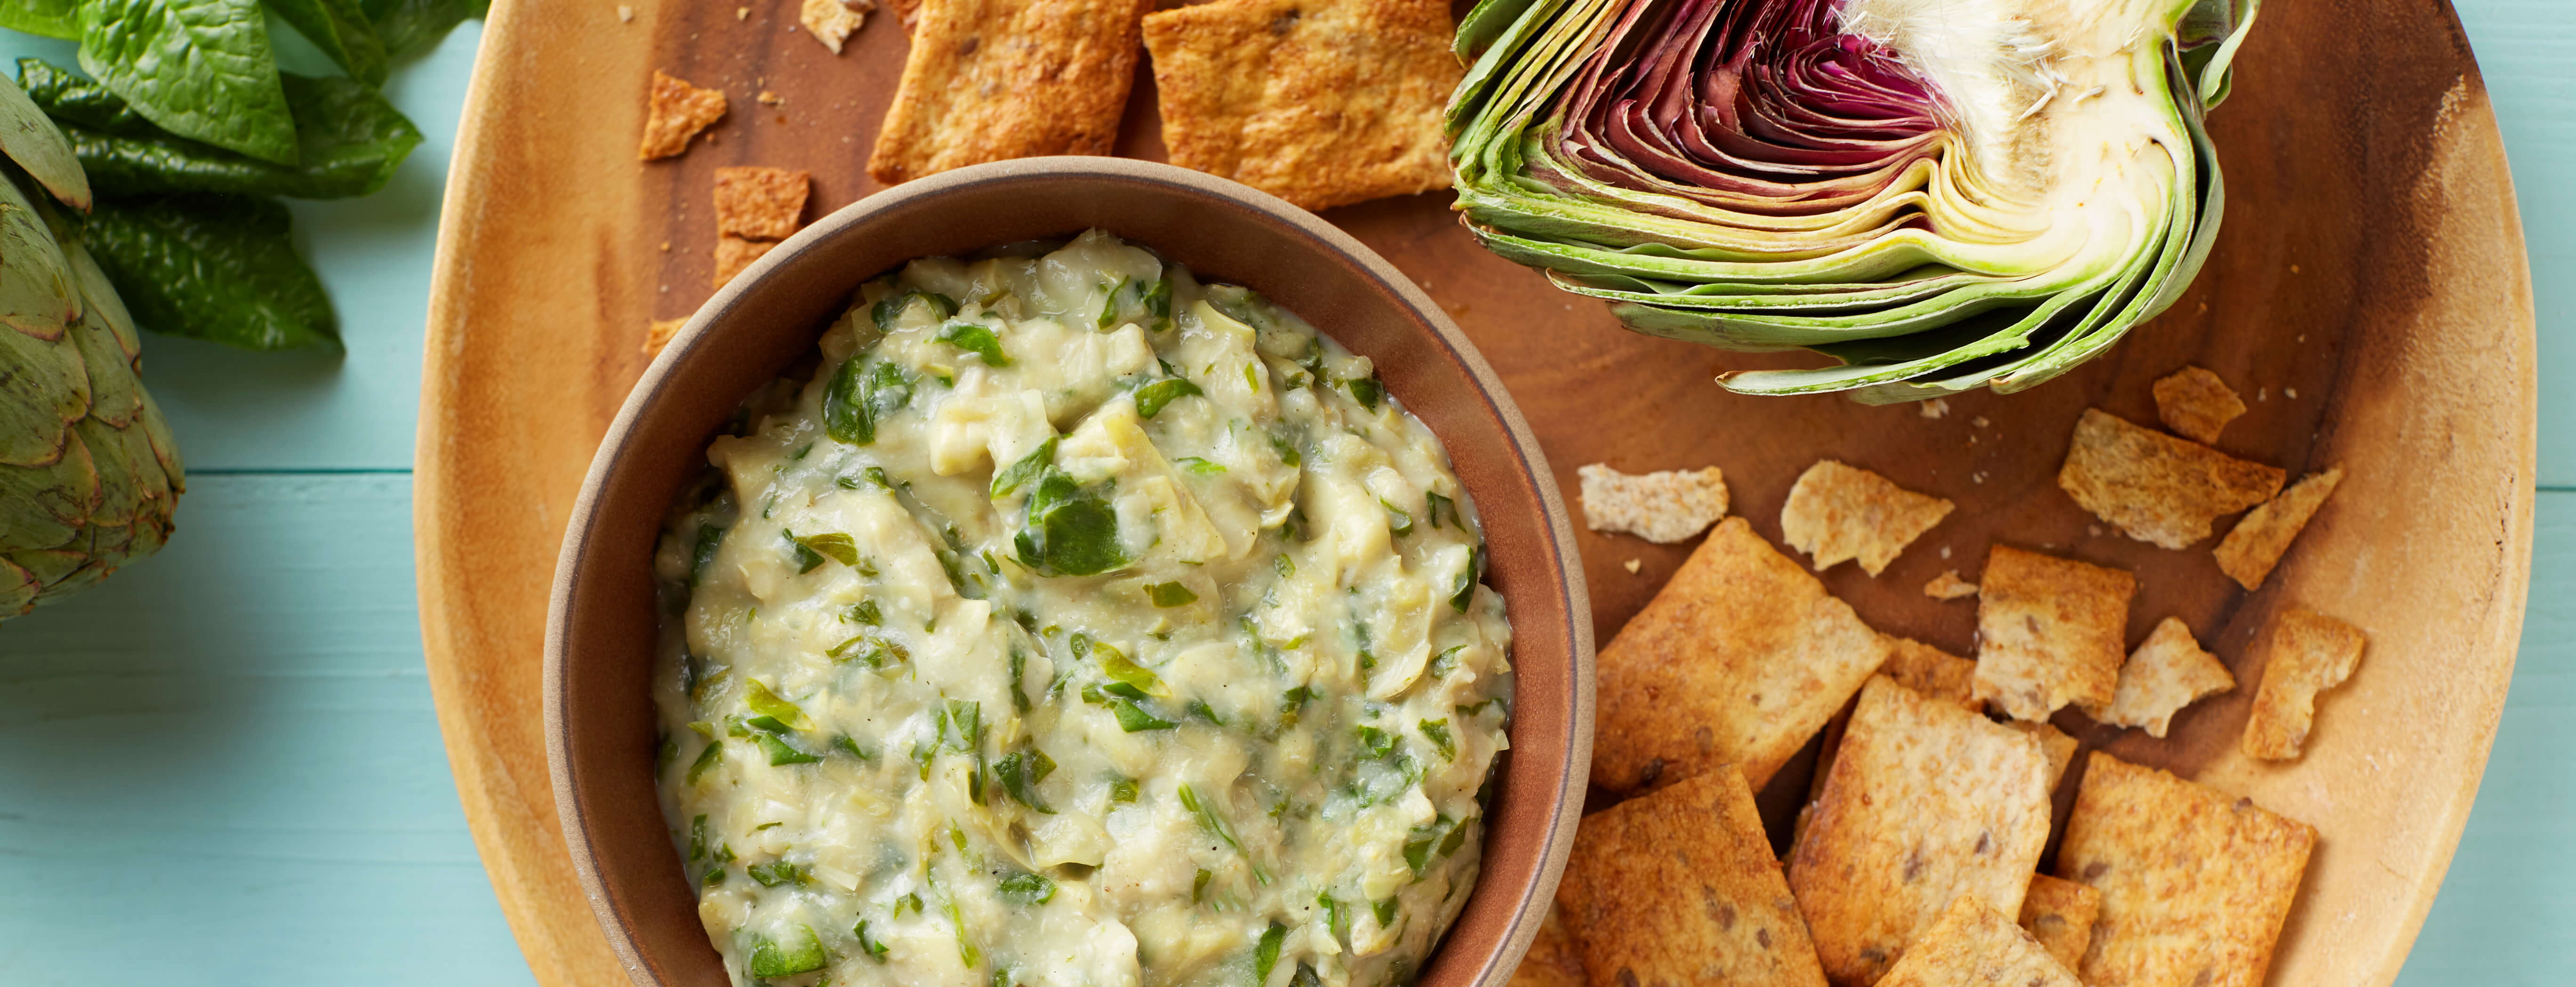 dairy-free spinach and artichoke dip